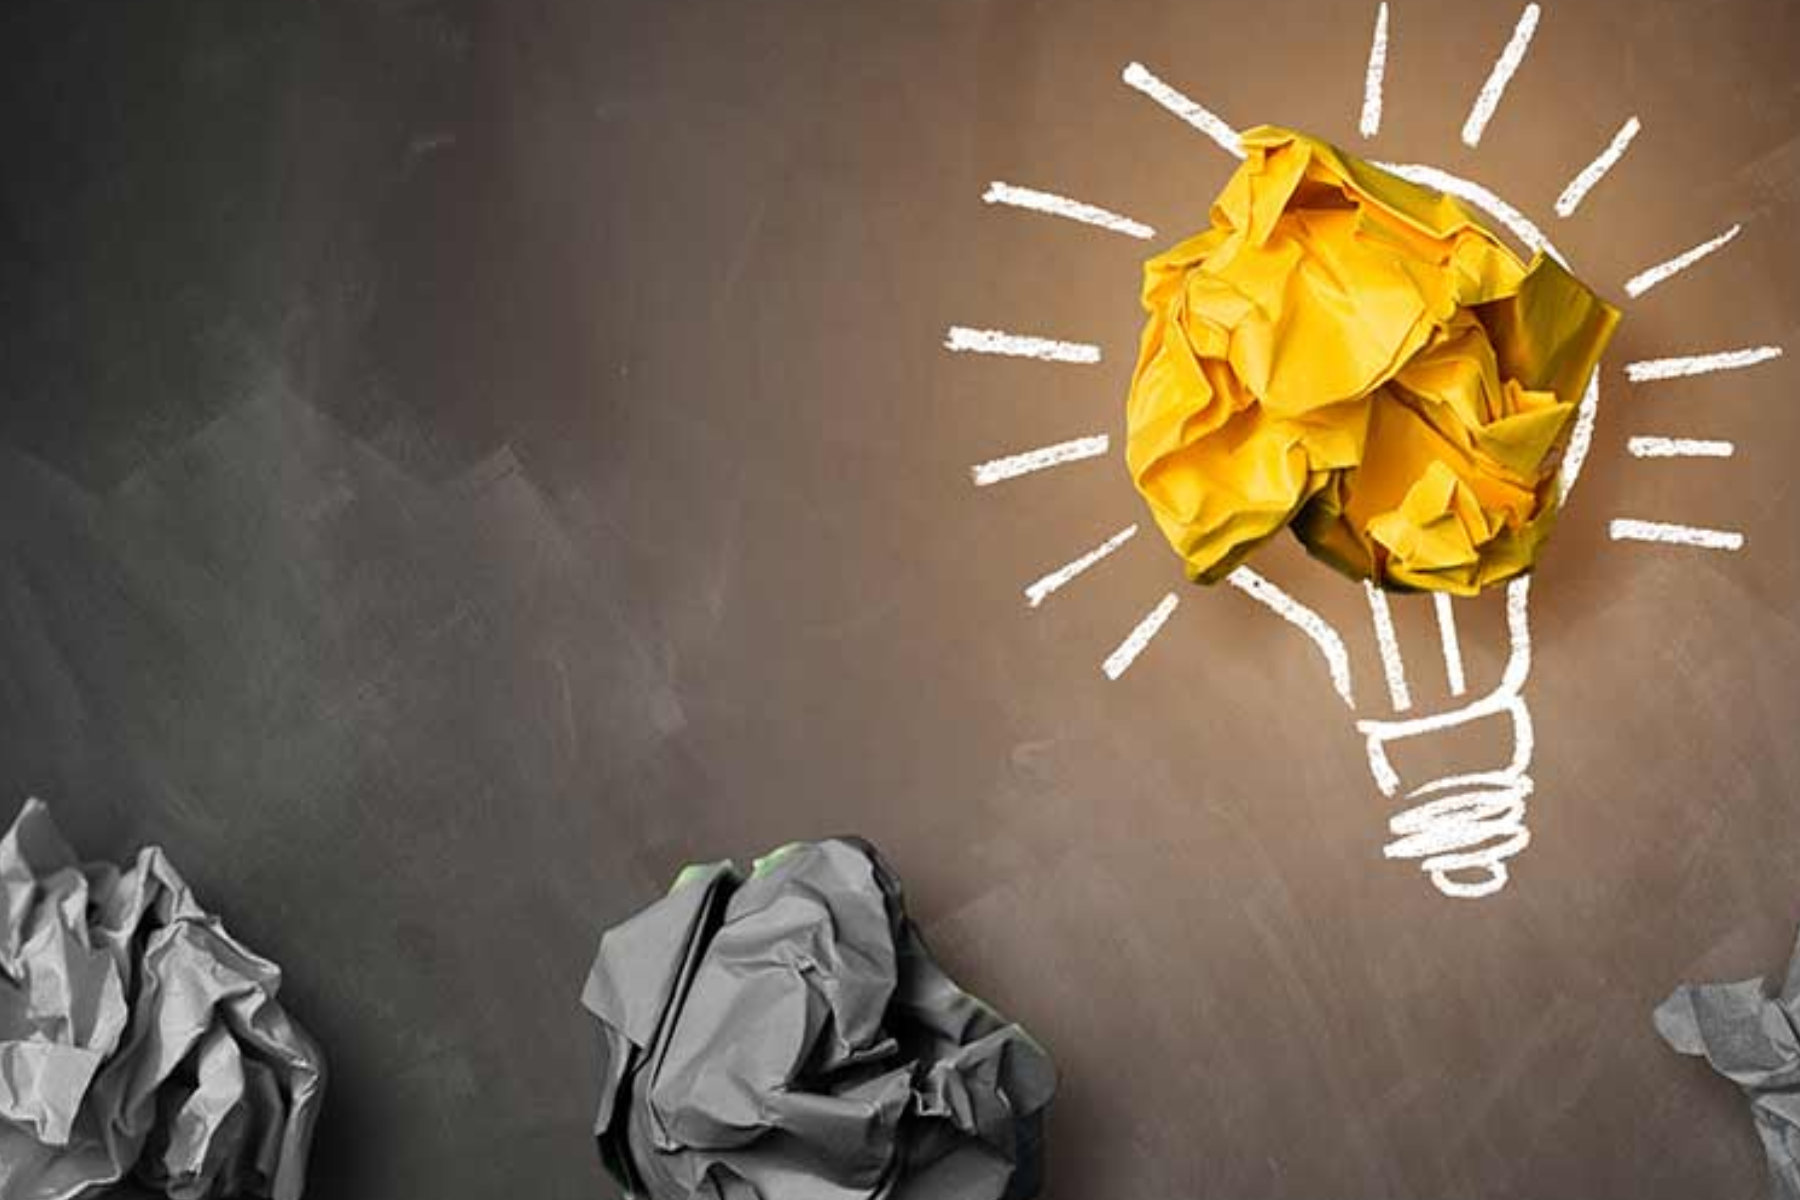 A lightbulb with yellow crumpled paper and three crumpled gray papers